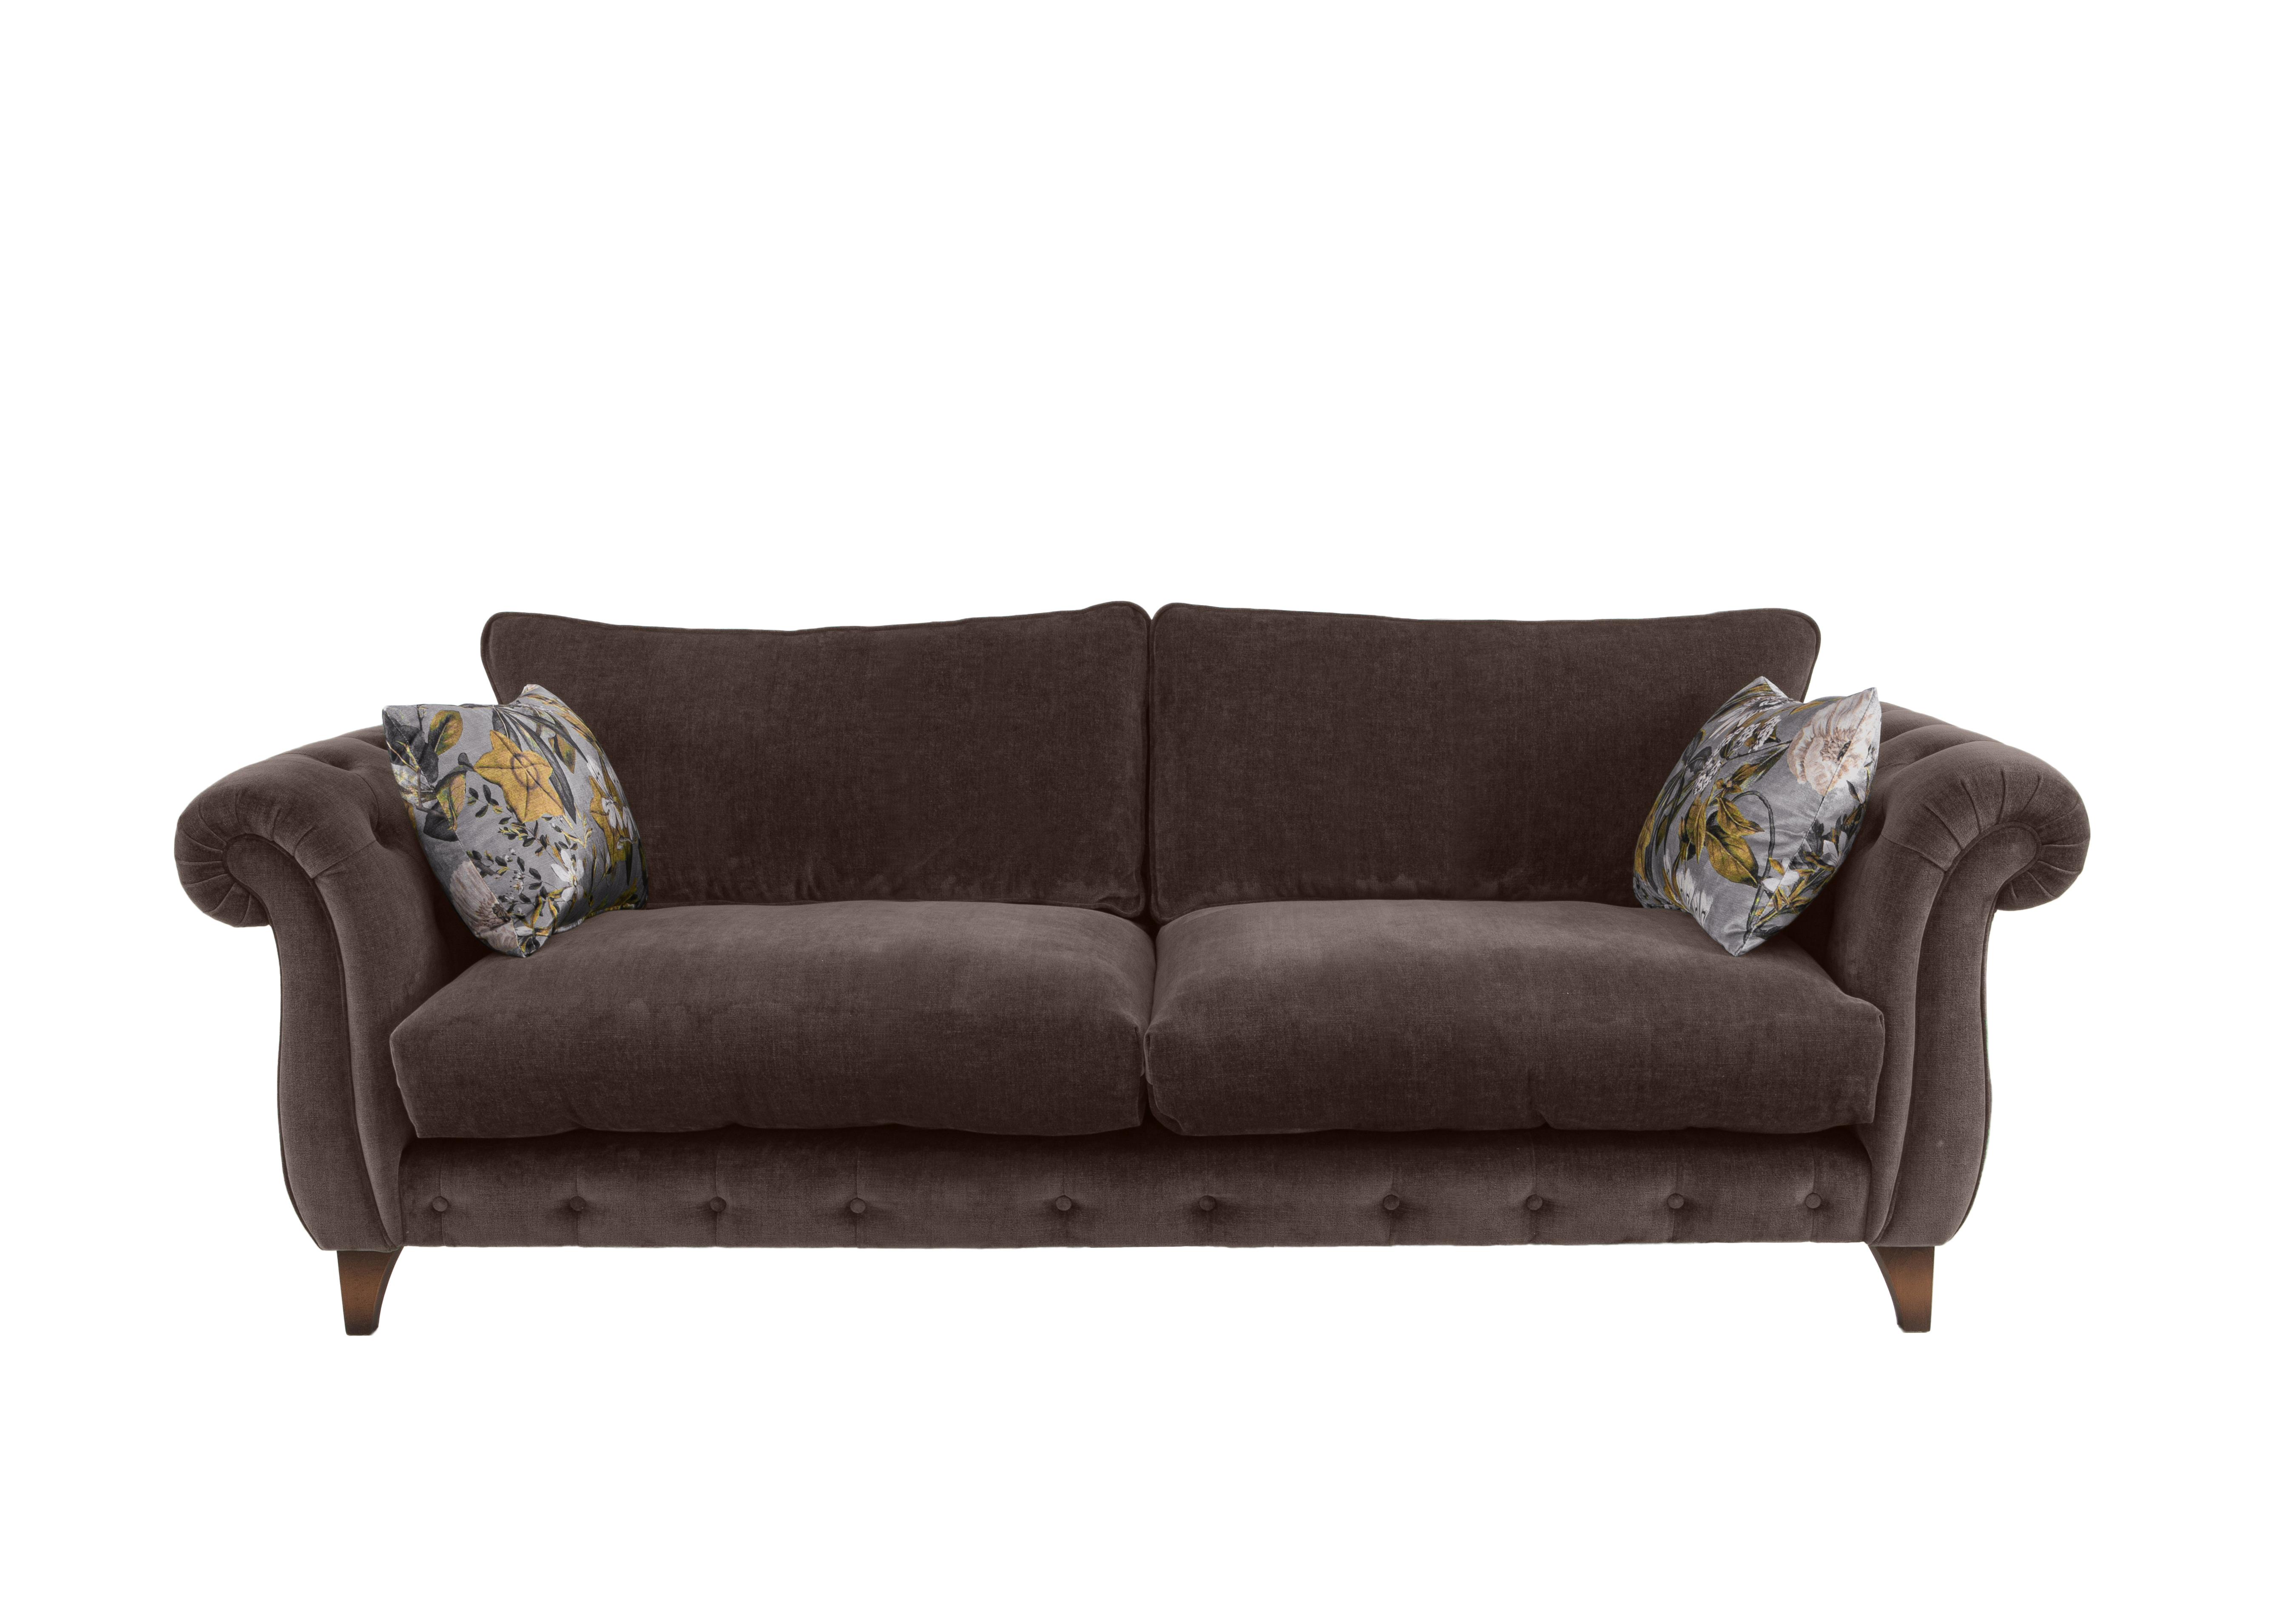 Boutique Palace Fabric 3 Seater Classic Back Sofa in Oasis Mocha on Furniture Village